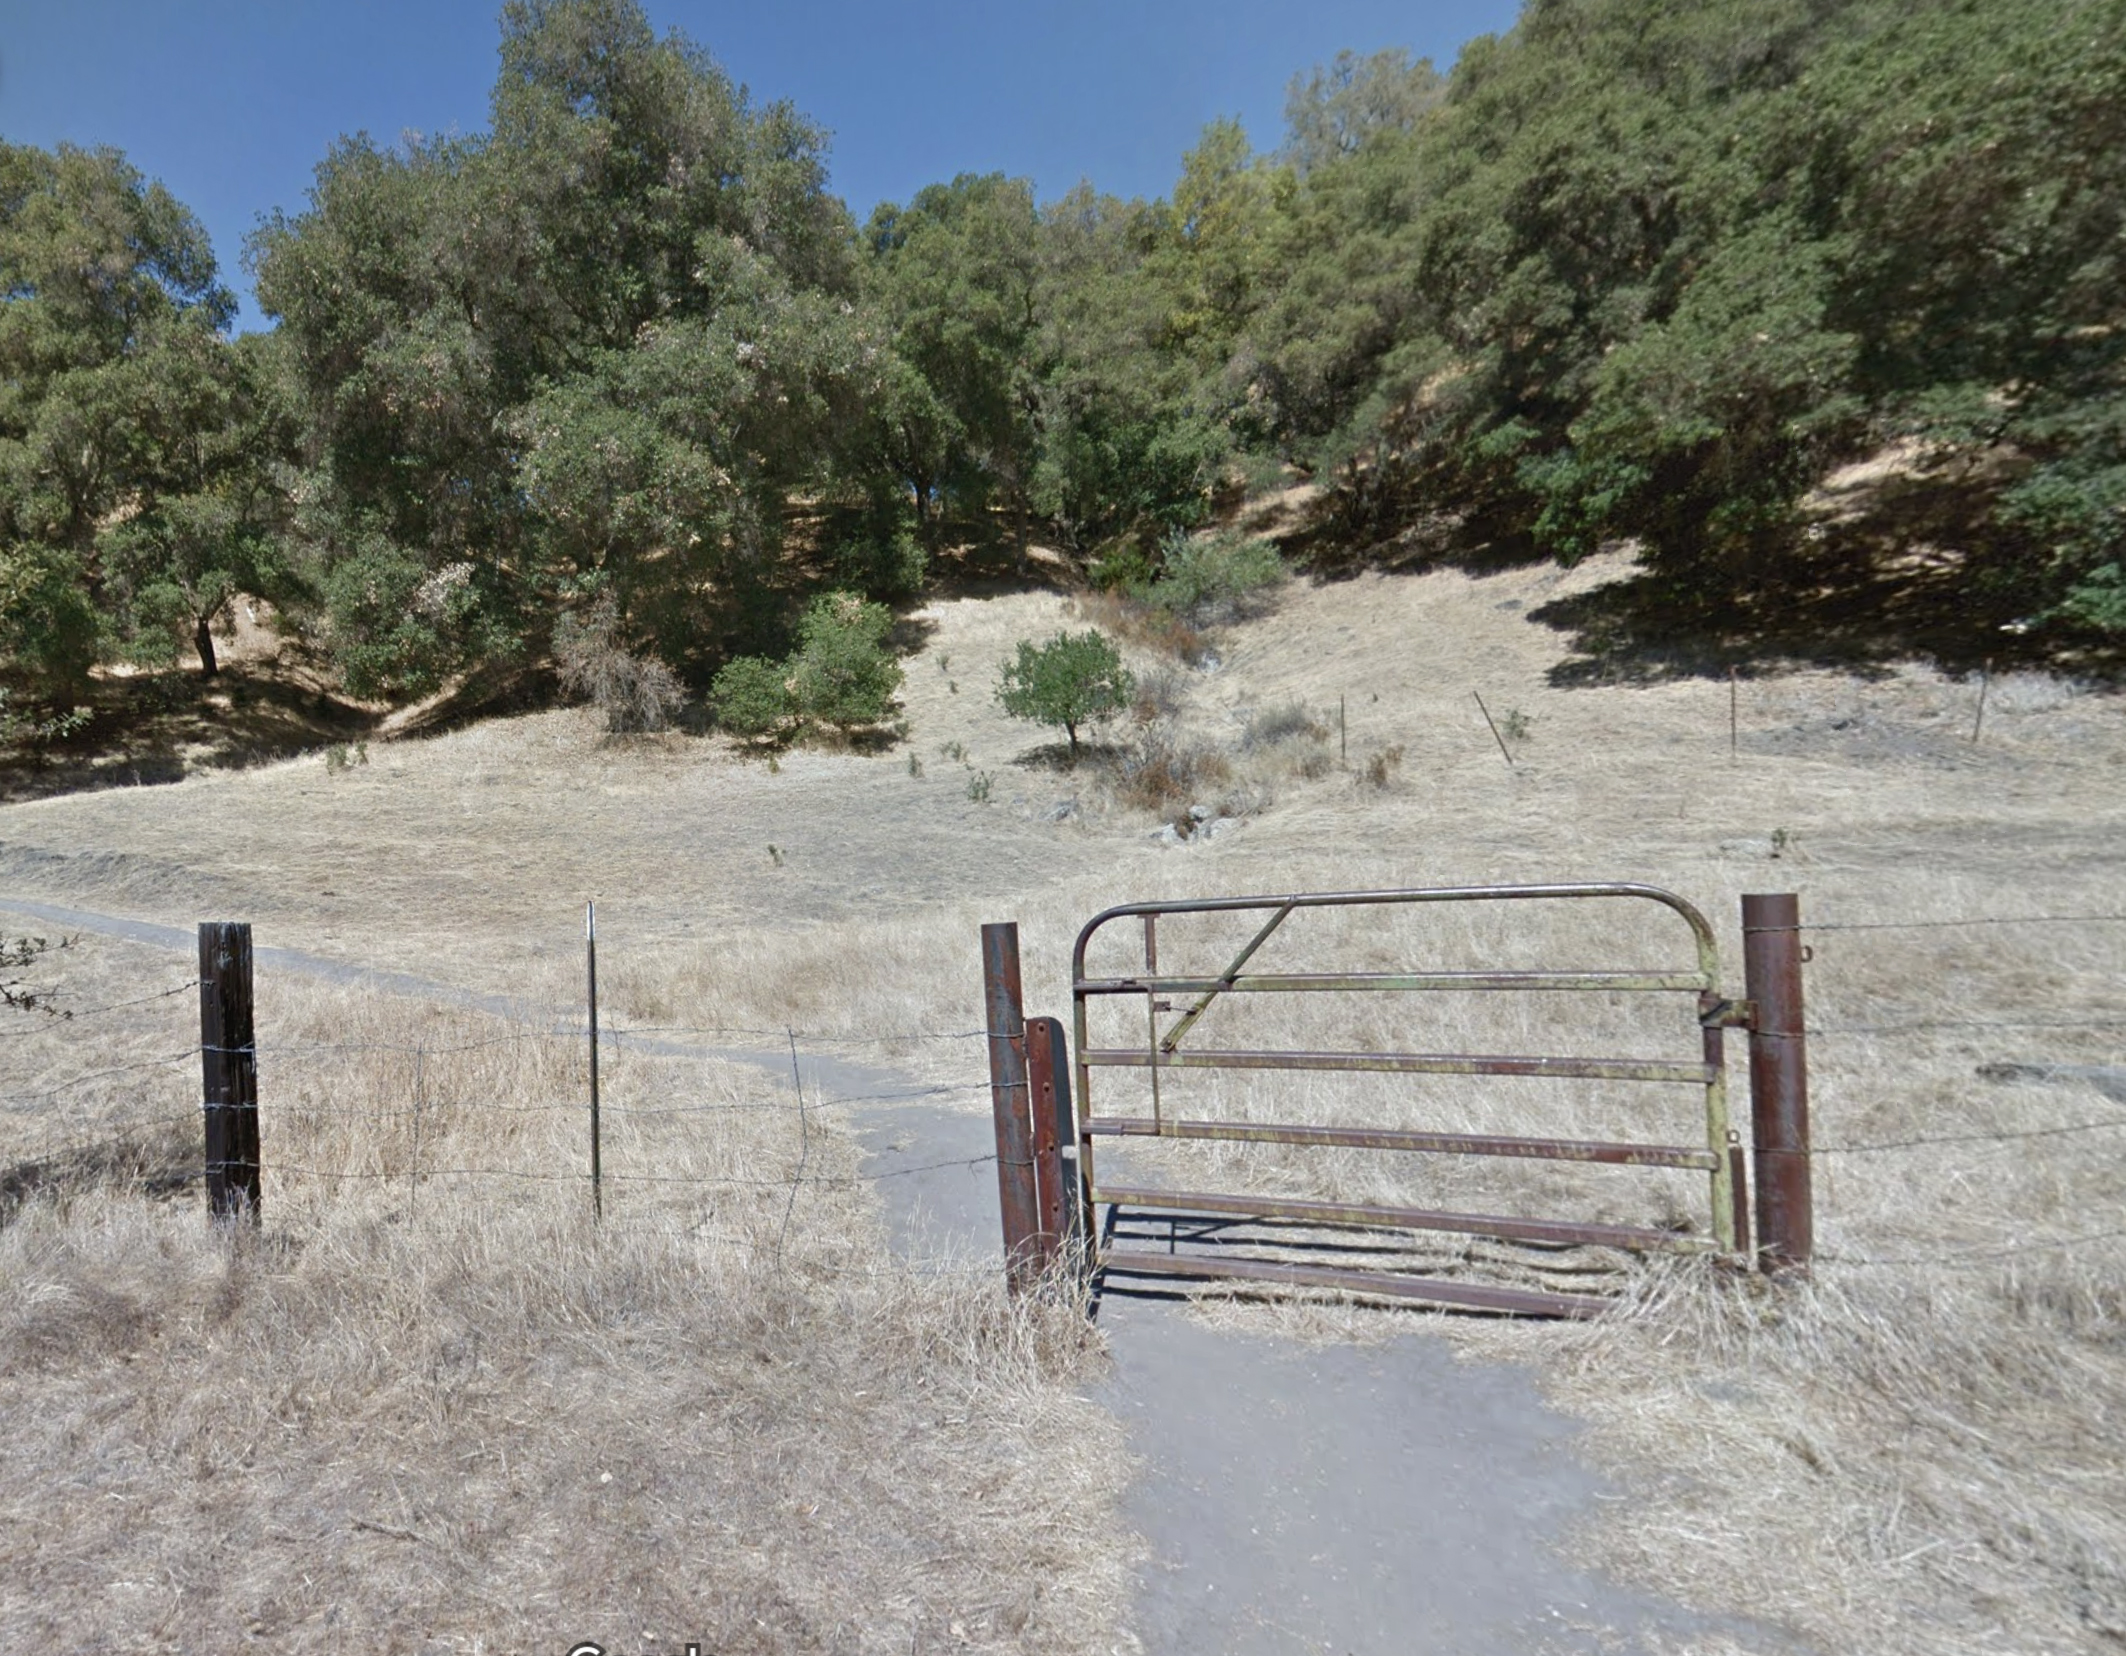 The image shows a rusty metal gate on a dirt path, with dry grass and scattered bushes around. Behind the gate are several trees on a sloping hill under a clear blue sky.